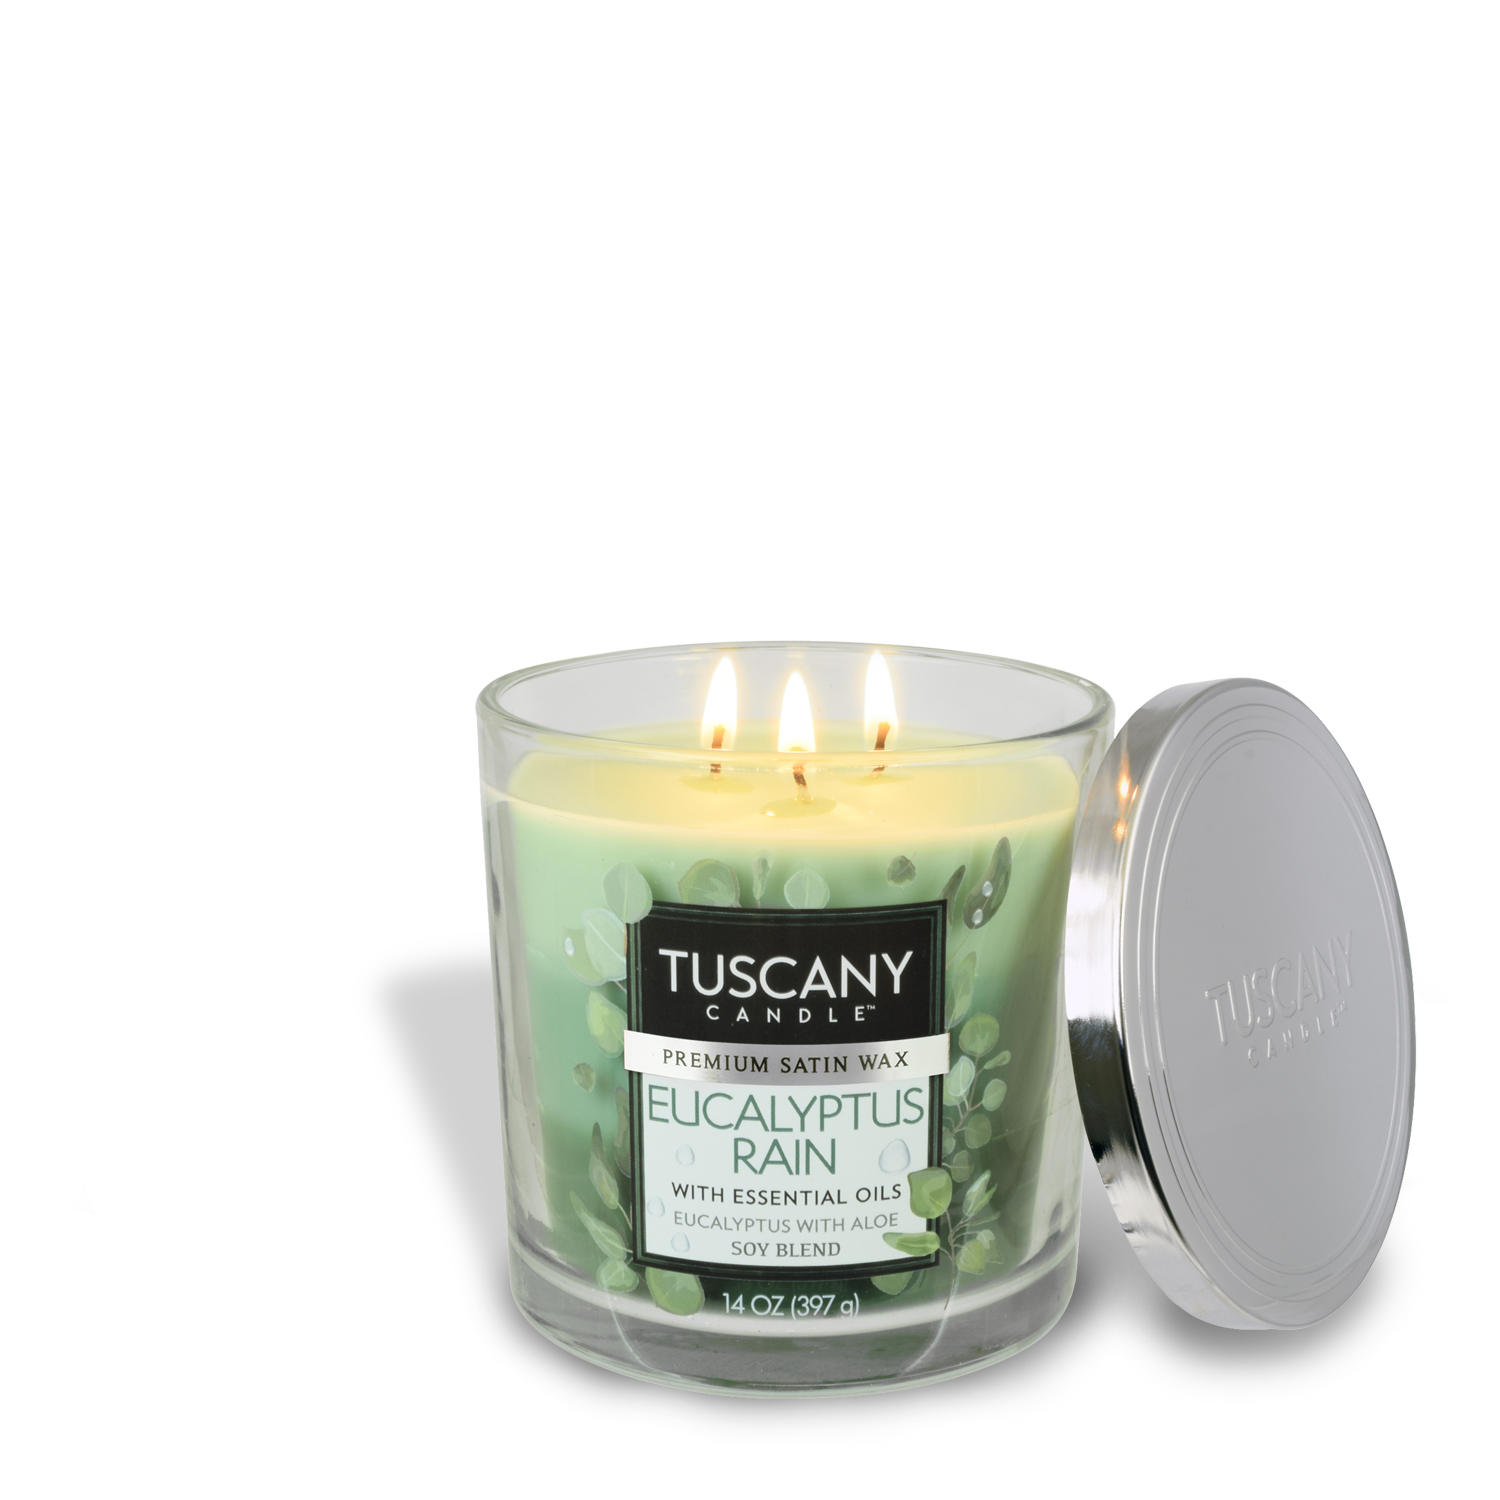 Experience relaxation in Tuscany with the soothing scent of Eucalyptus Rain Long-Lasting Scented Jar Candle (14 oz) by Tuscany Candle® EVD. Transport yourself to the beautiful landscapes of Tuscany and unwind in the calming ambiance created.